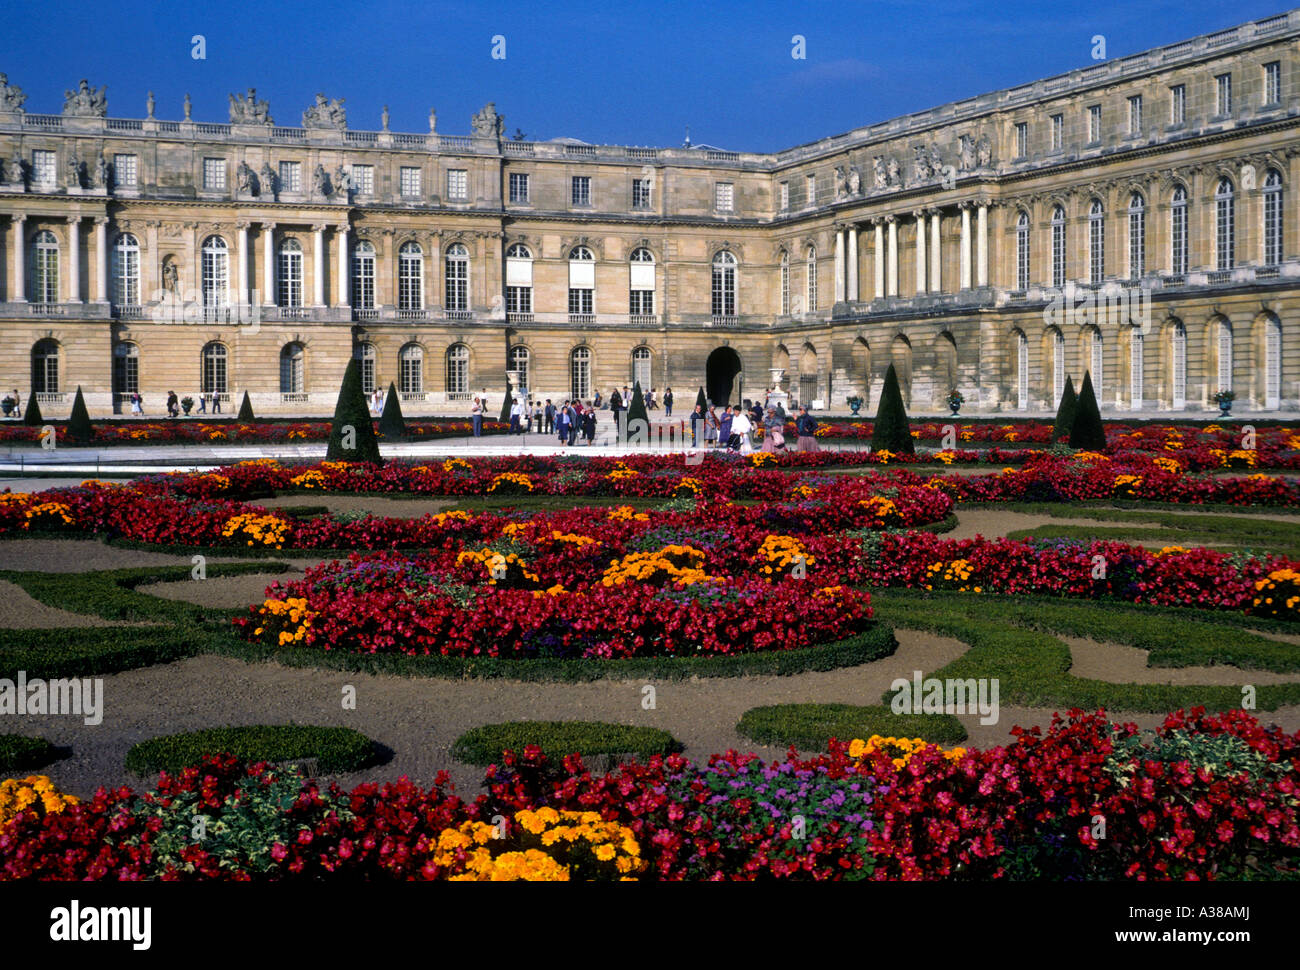 Formal gardens, Palace of Versailles, city of Versailles, Ile-de-France region, France, Europe Stock Photo